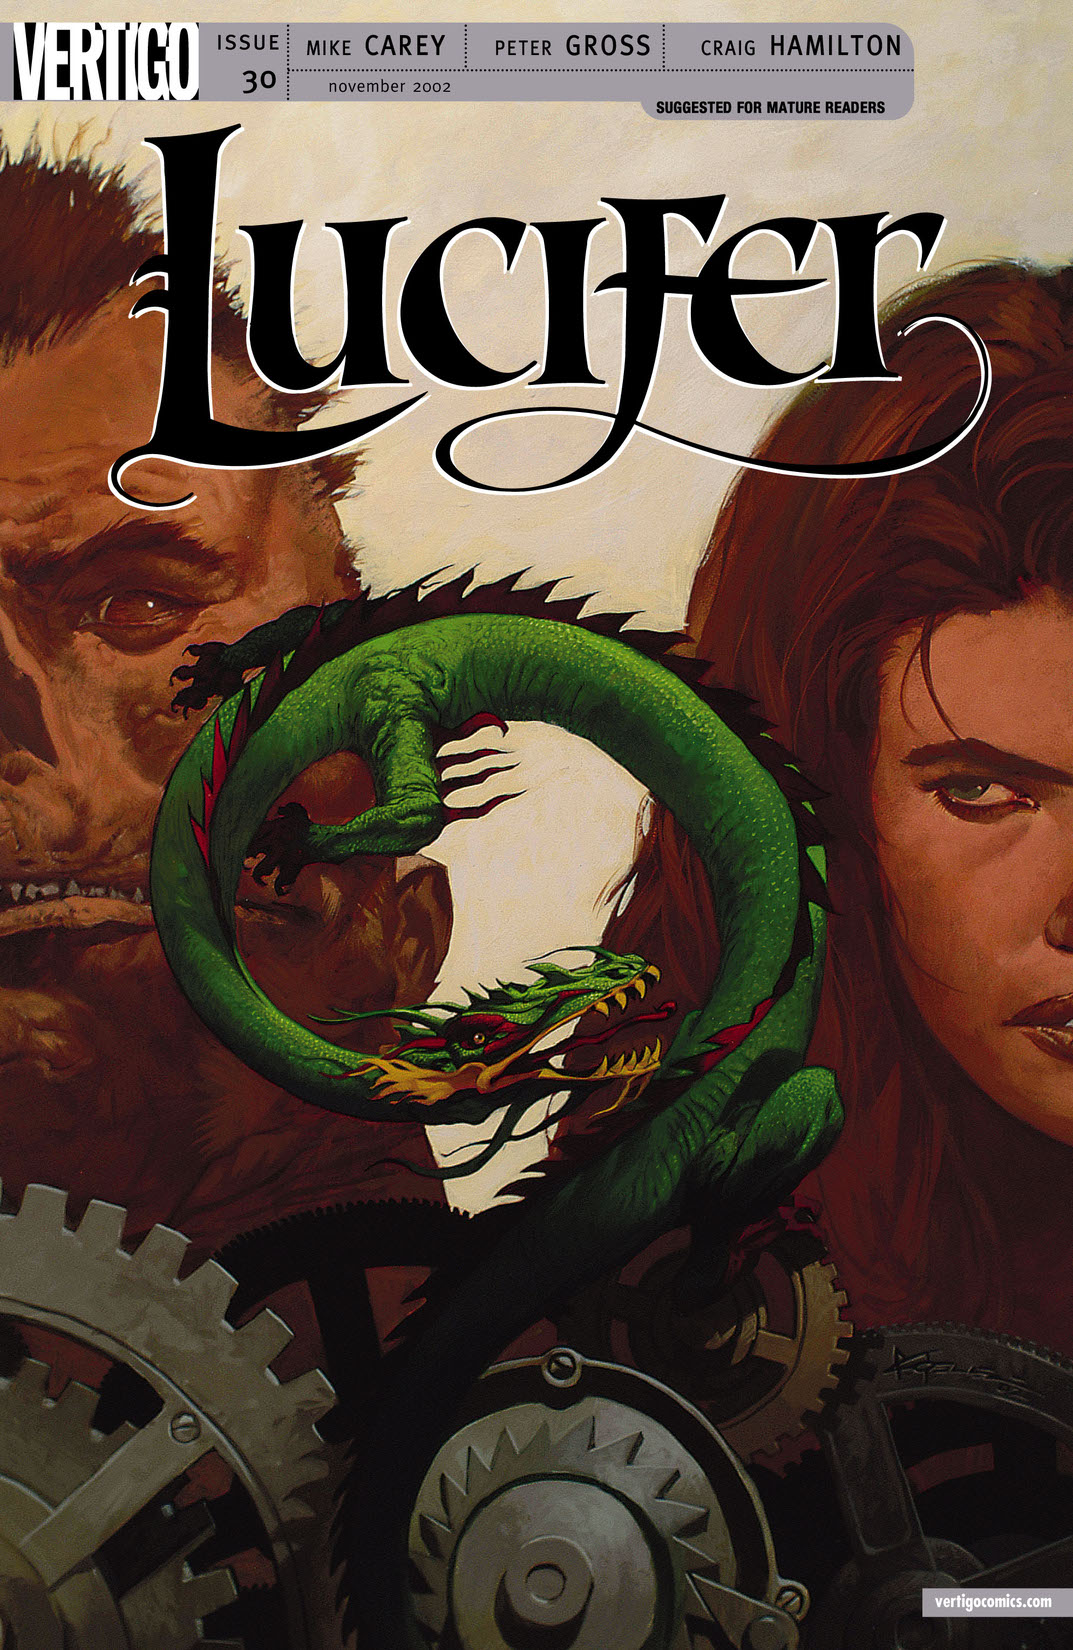 Lucifer #30 preview images